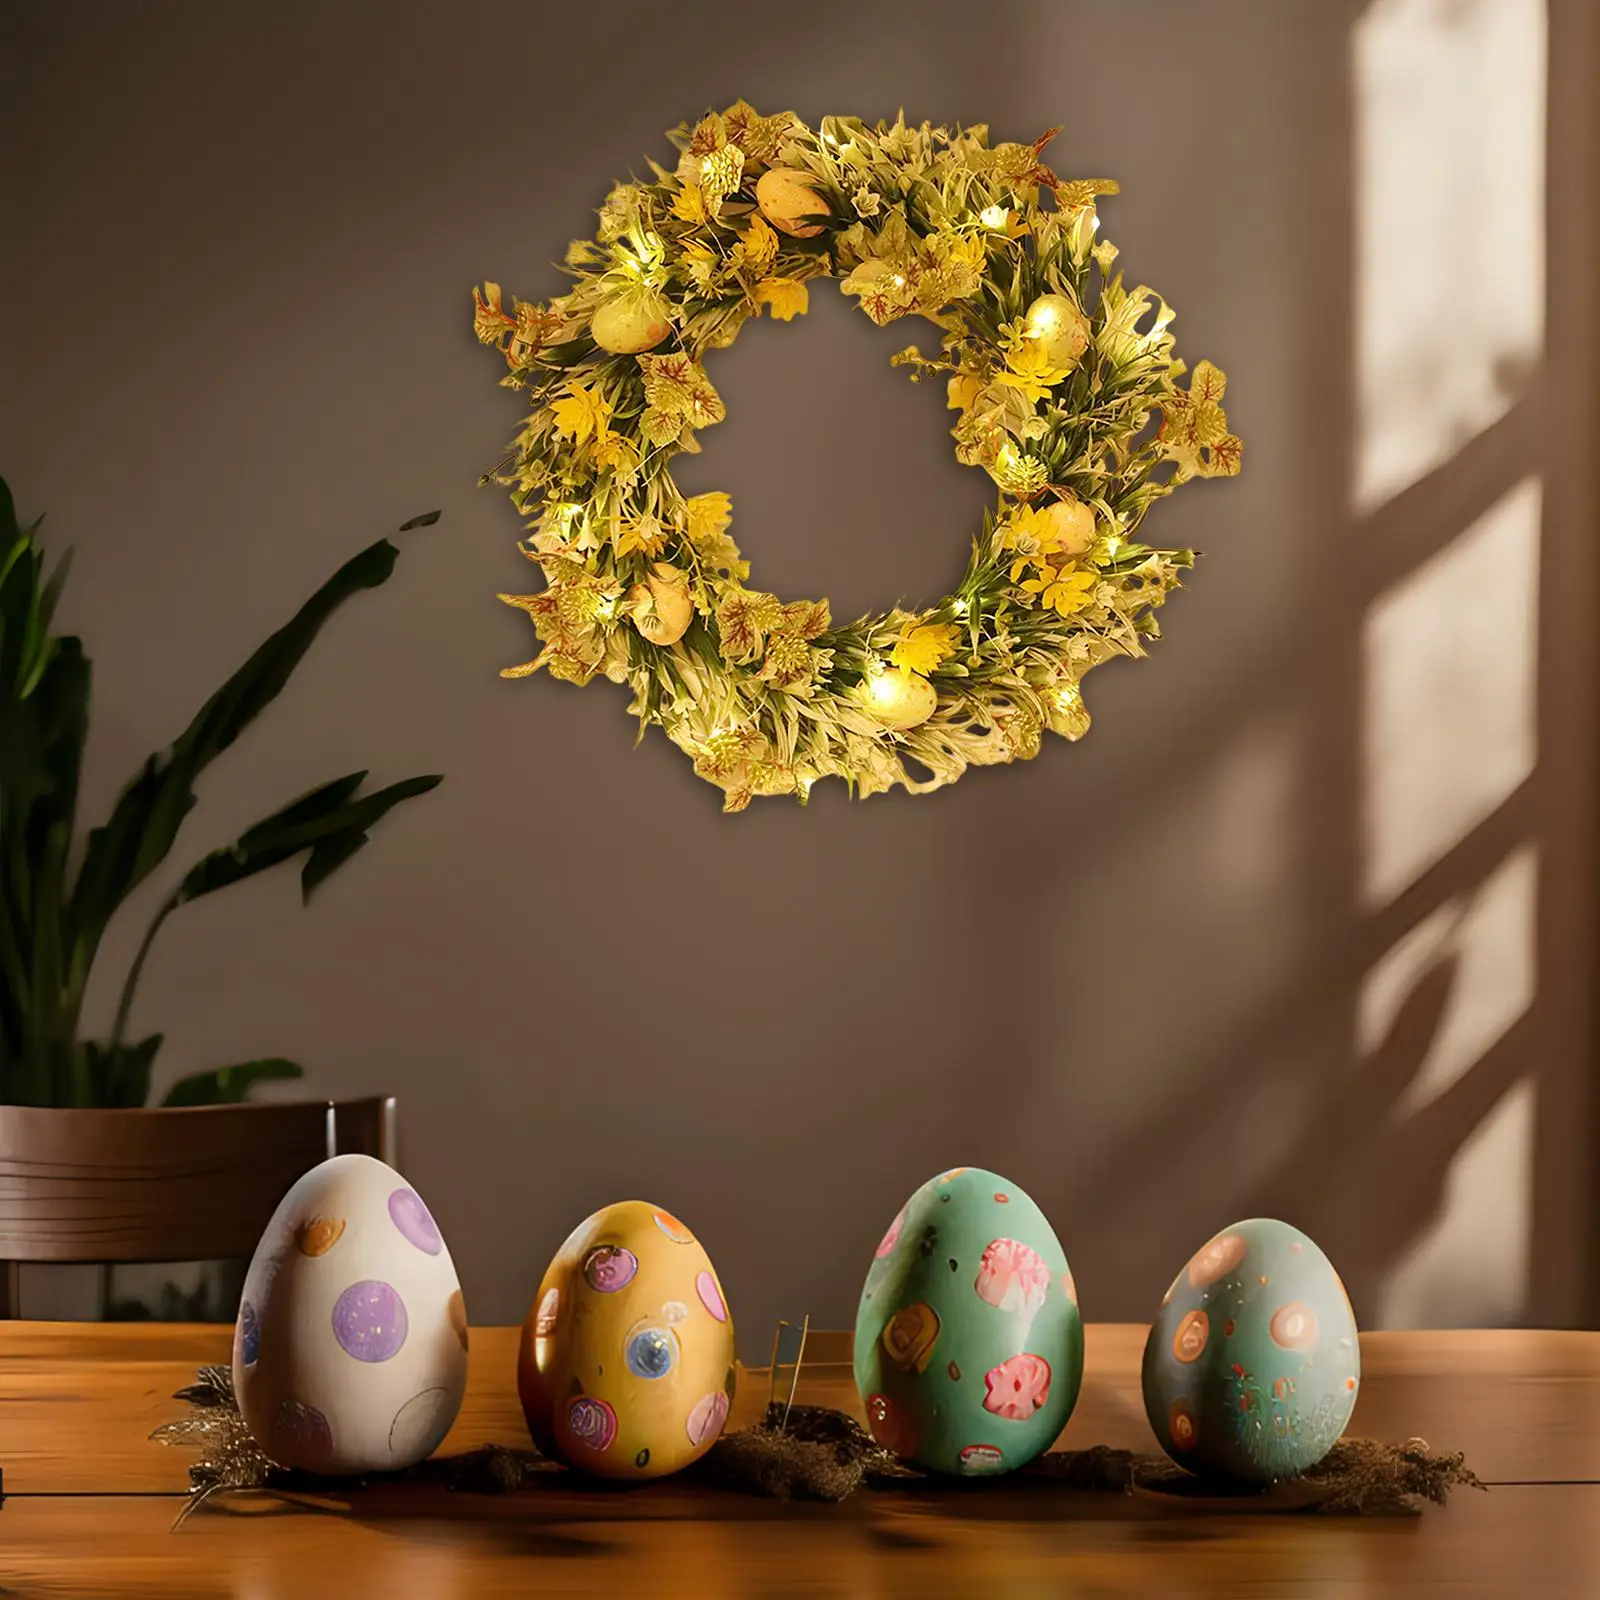 Easter Egg Flower Wreath Front Door Decorative Window Hanging Greenery Leaves Garland for Home Farmhouse Party Festival Decor